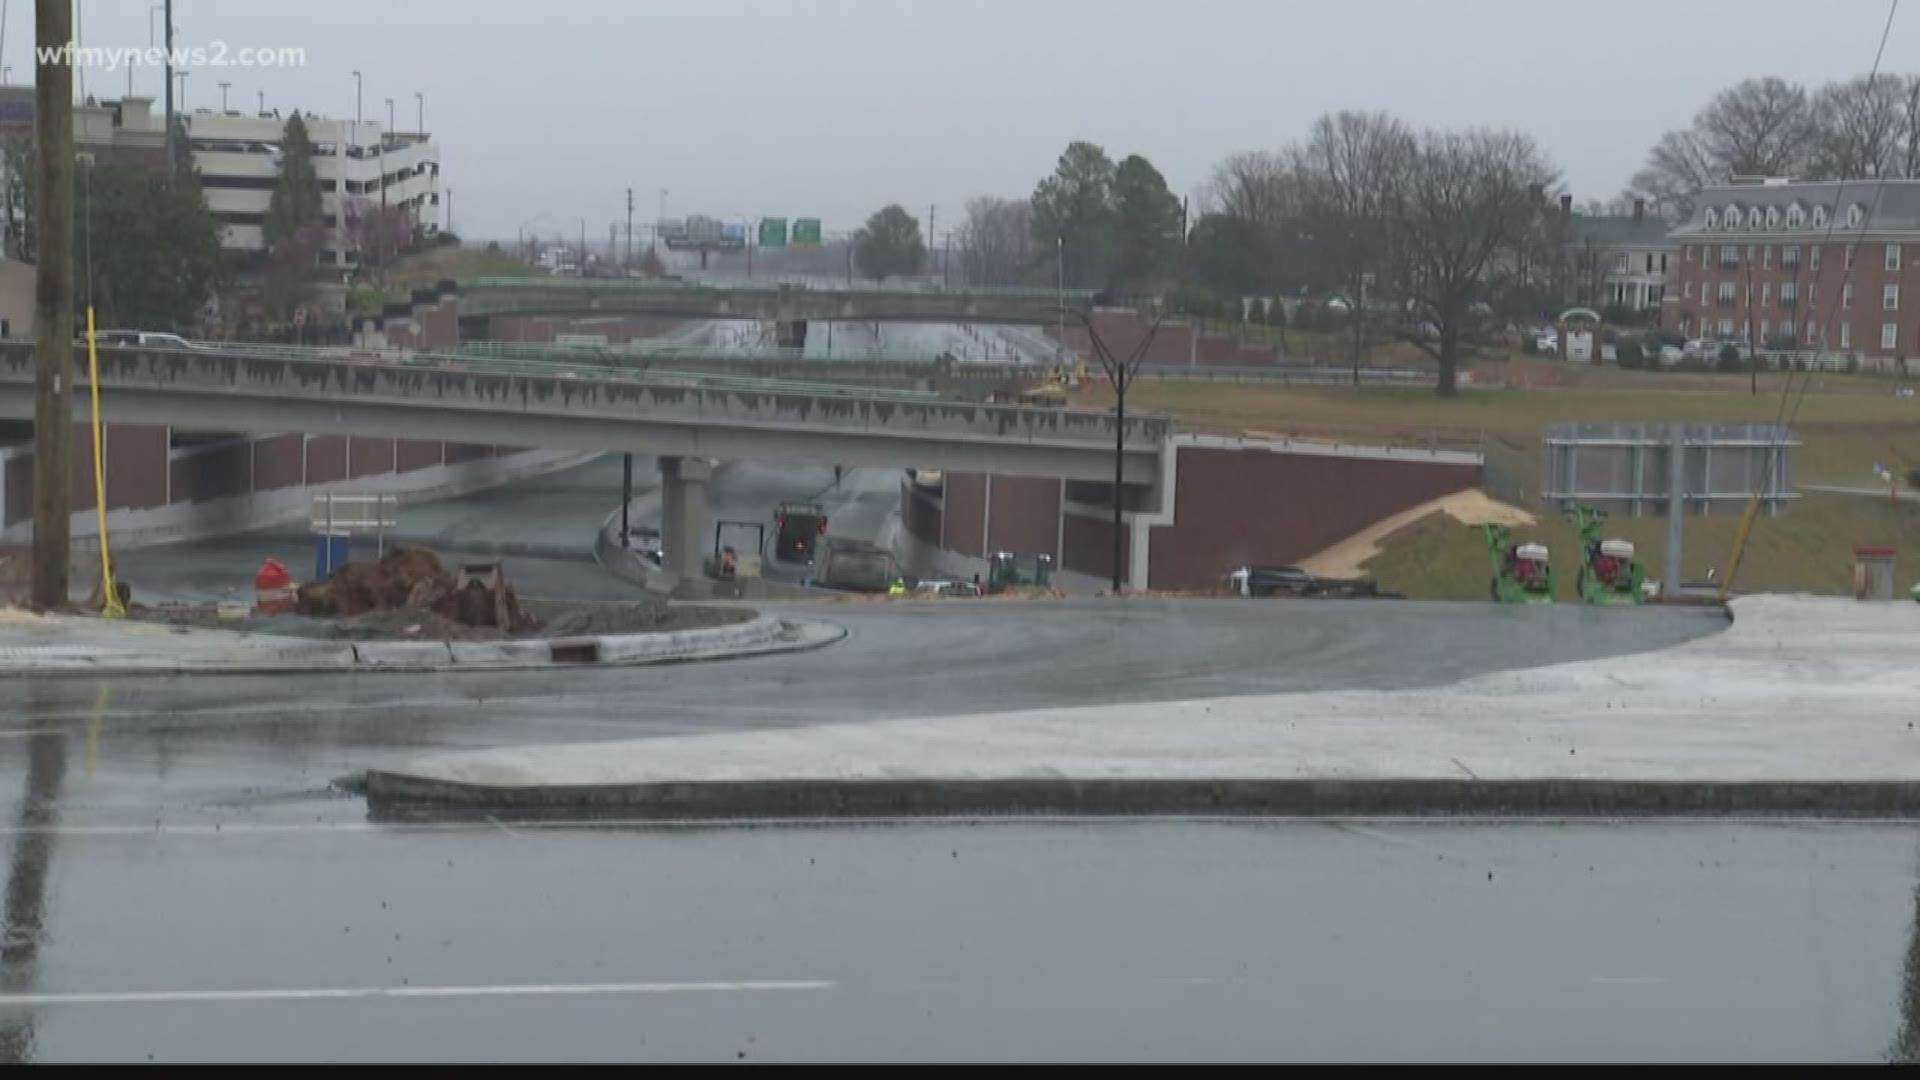 The North Carolina Department of Transportation (NCDOT) says it hopes to open the highway Sunday.